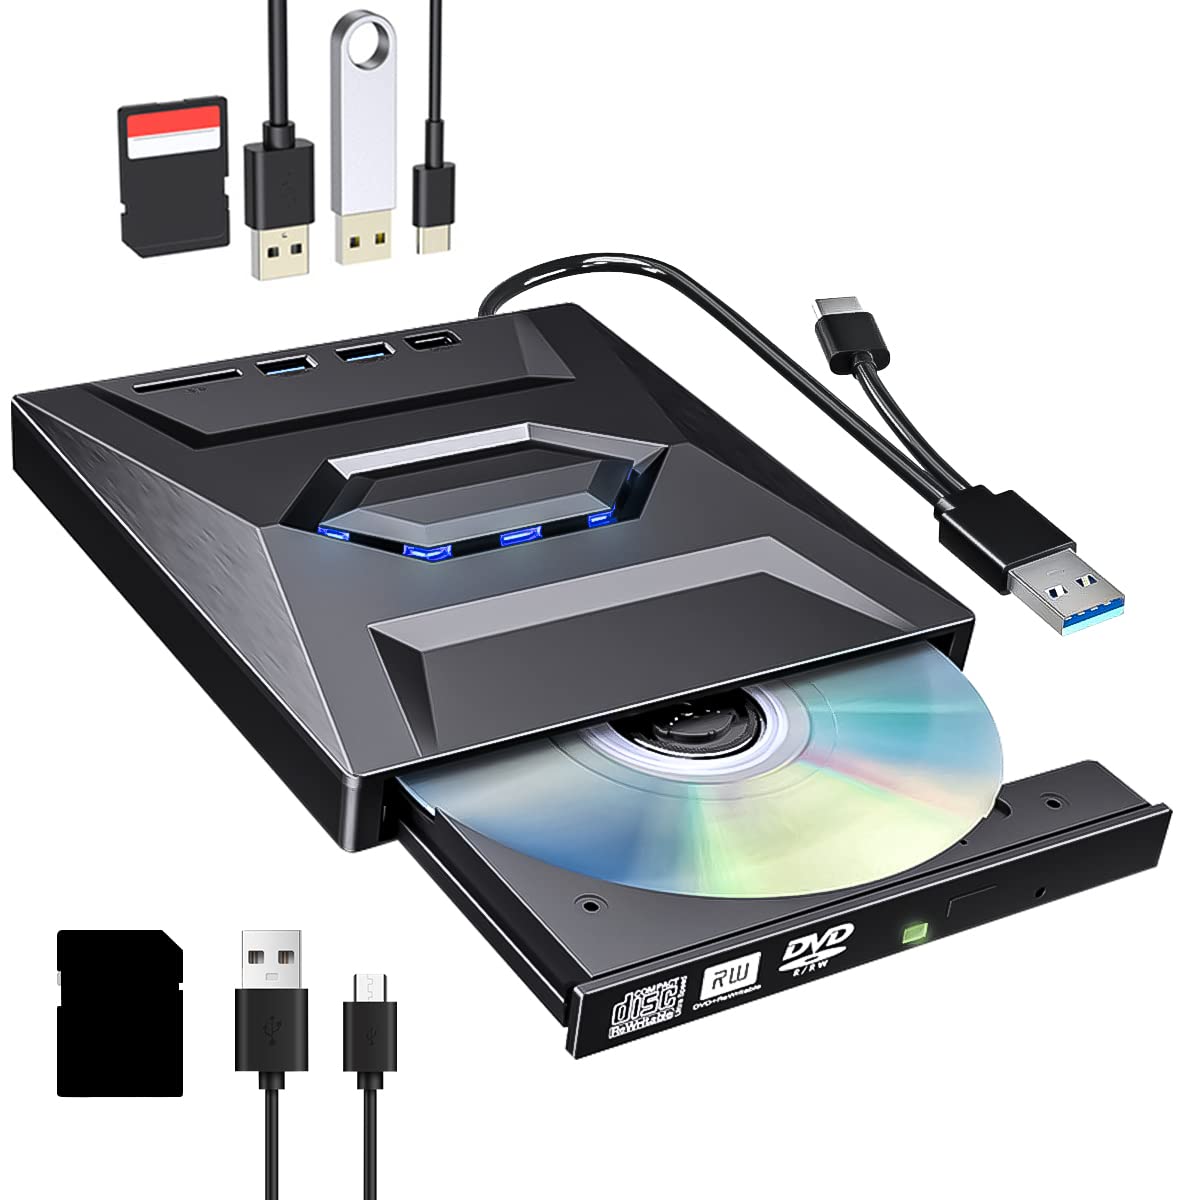 External DVD Drive For Laptop USB 3.0 Type-C Portable CD/DVD Optical Drive  Player Writer CD Burner With 2 USB 3.0 Ports, Type C Port SD Card Reader Fo